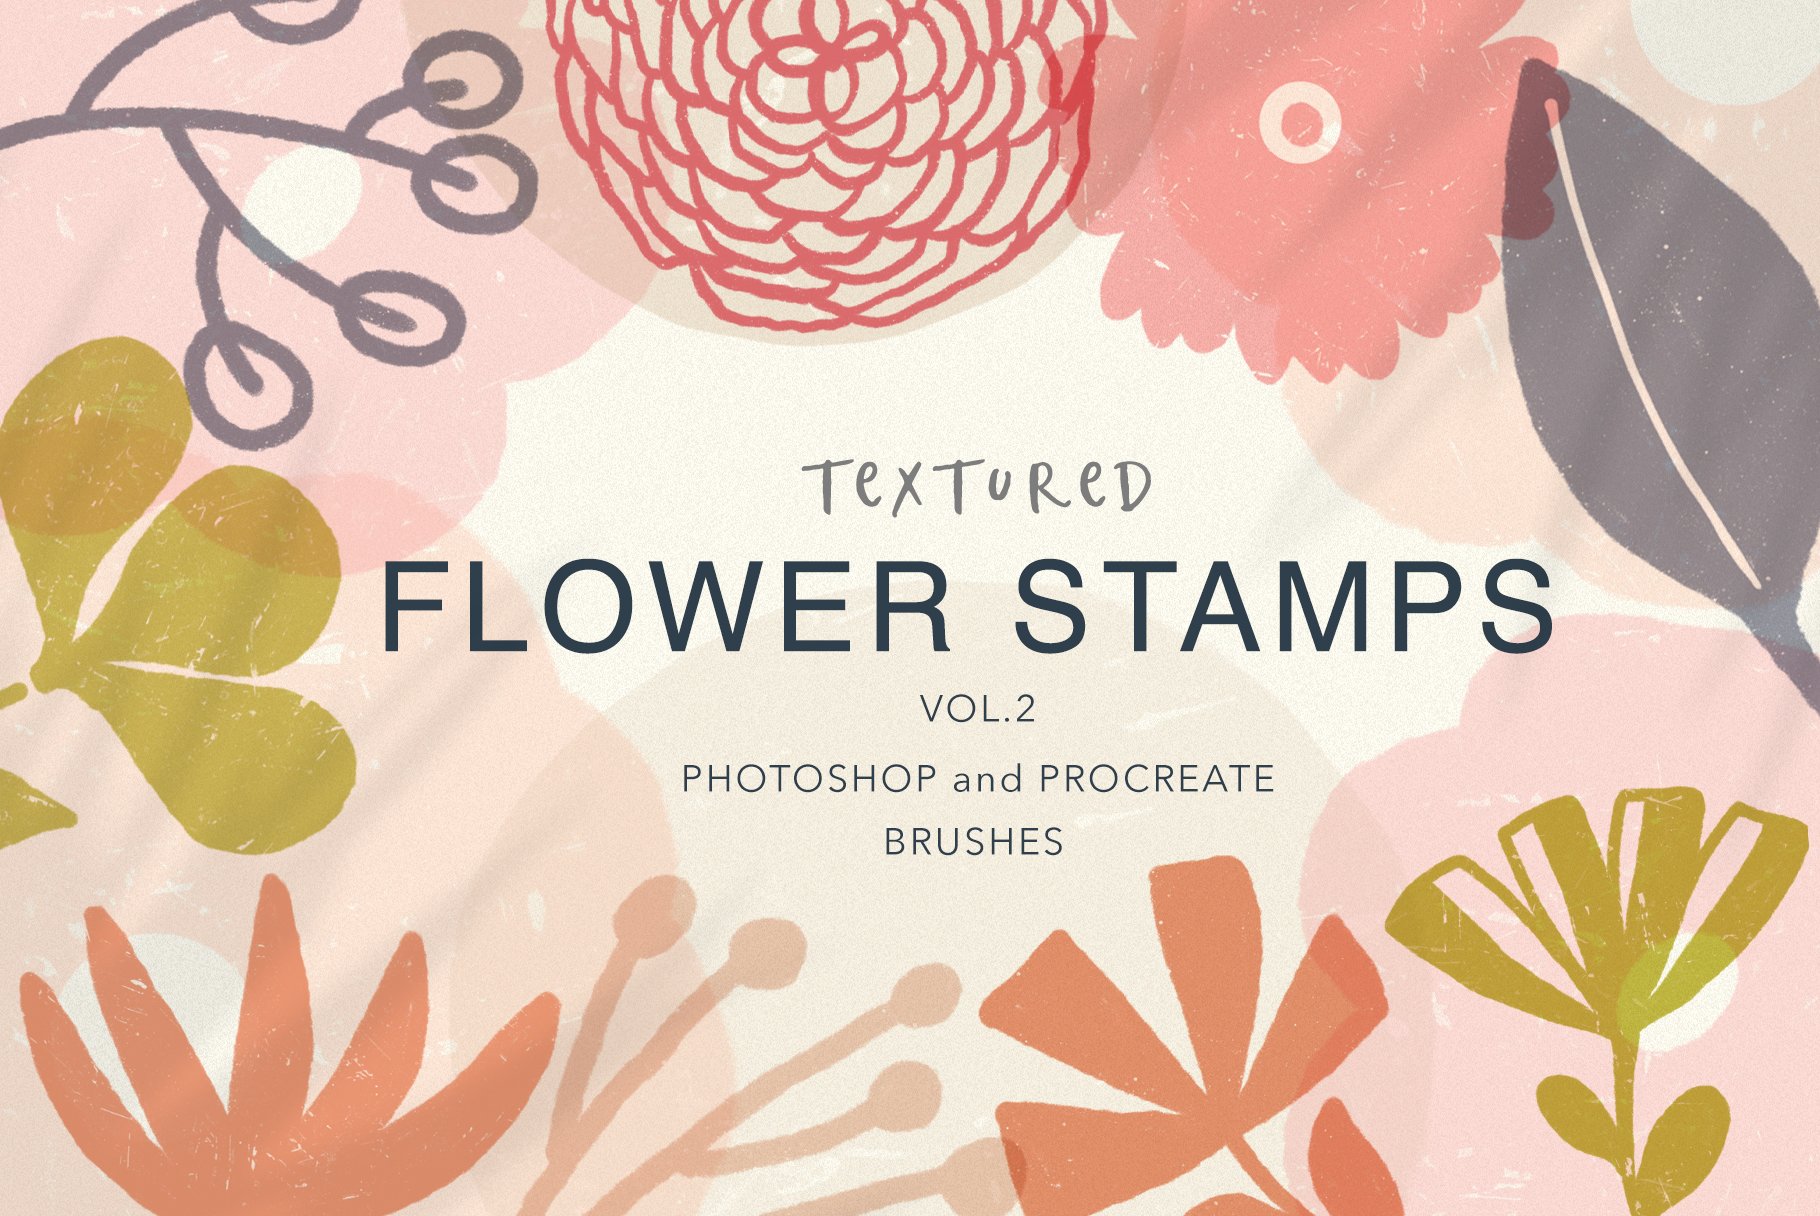 Textured Flower Stamps Vol 2cover image.